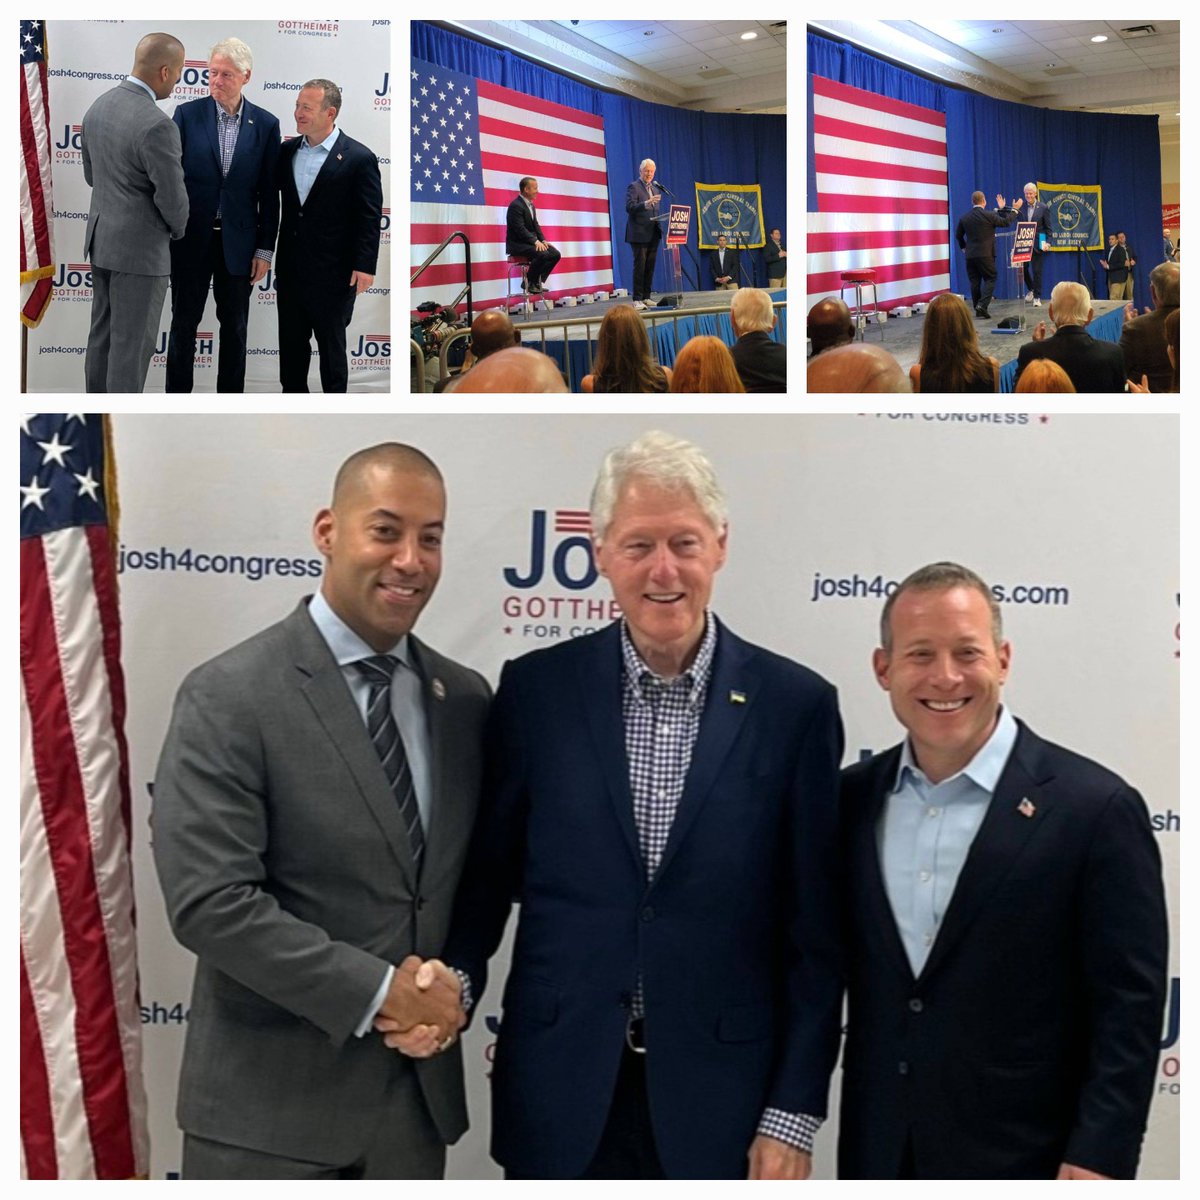 On the campaign trail w/Pres Bill Clinton in supprt of Congressman Gottheimer. There's so much on the line this Tuesday, we have to keep wrking until the very last min to ensure we elect a Democratic majority in congress who will safeguard our freedoms & protect our democracy.